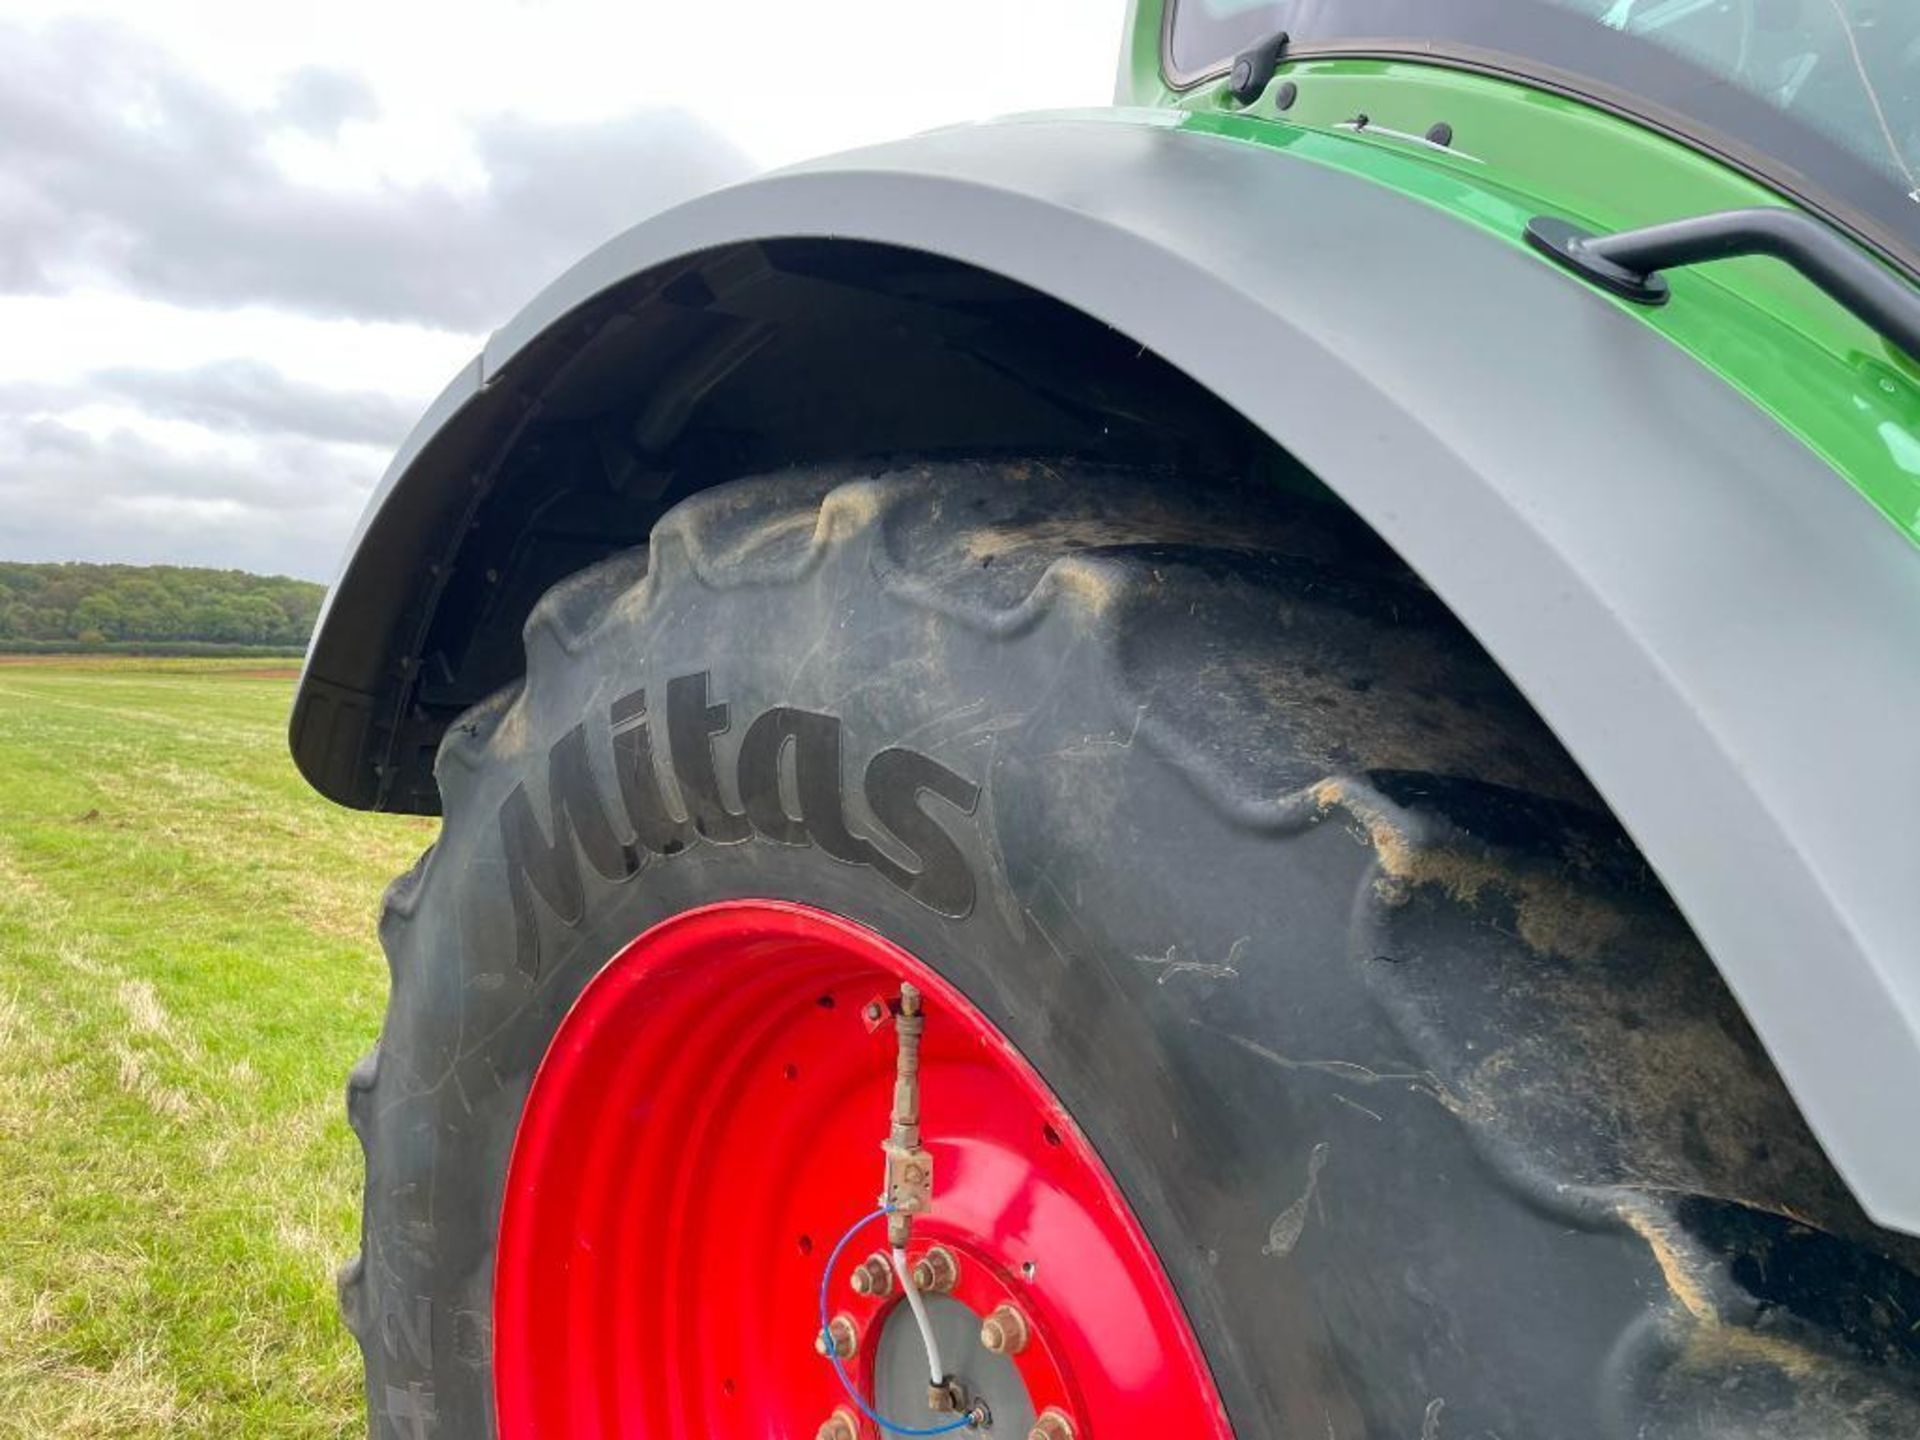 2018 Fendt 828 Vario Profi Plus 65kph 4wd tractor with Quicke Q8M front loader and pallet tines, fro - Image 11 of 29